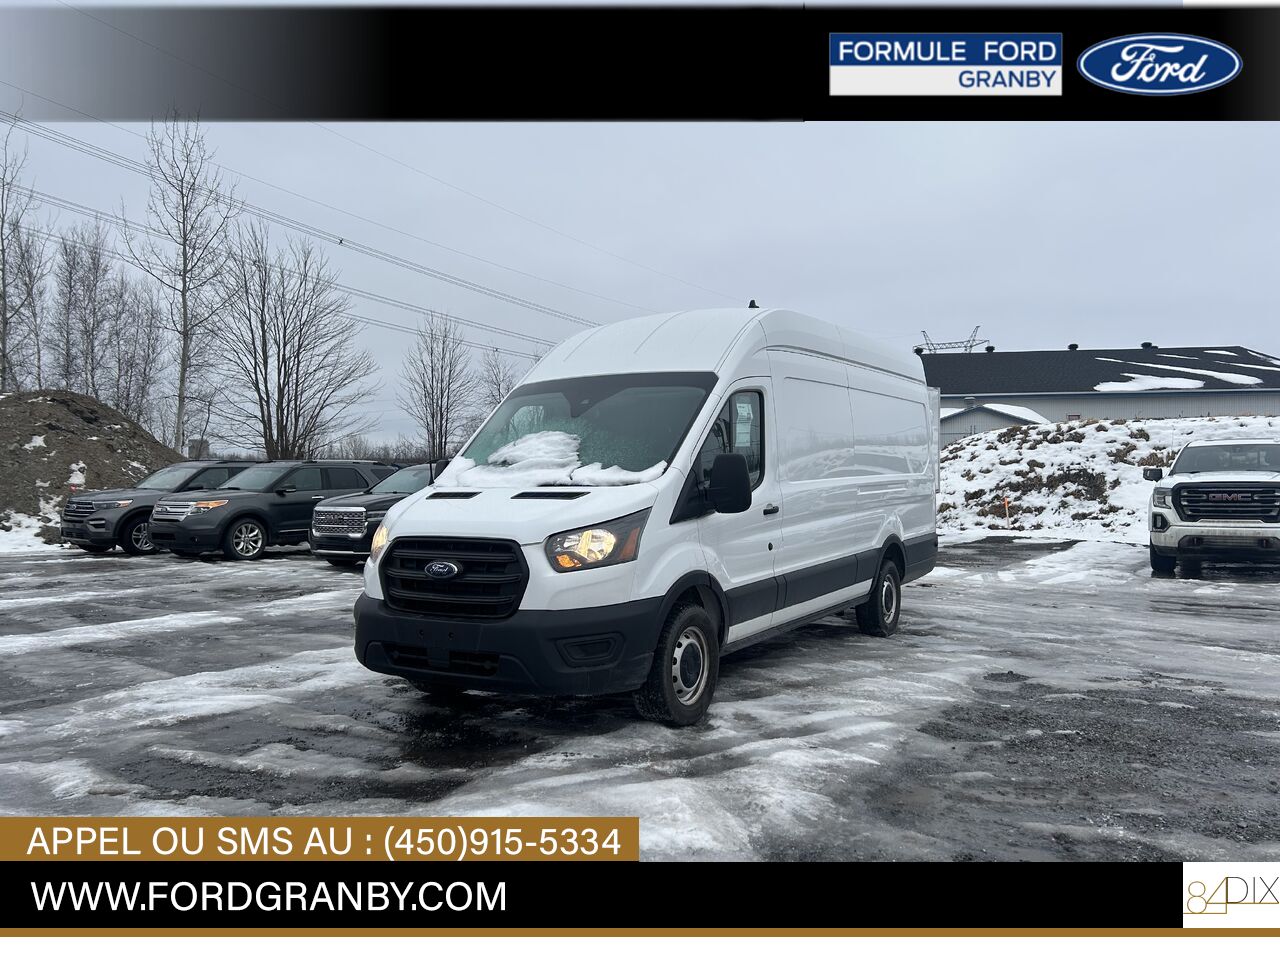 2020 Ford Transit fourgon utilitaire Granby - photo #6